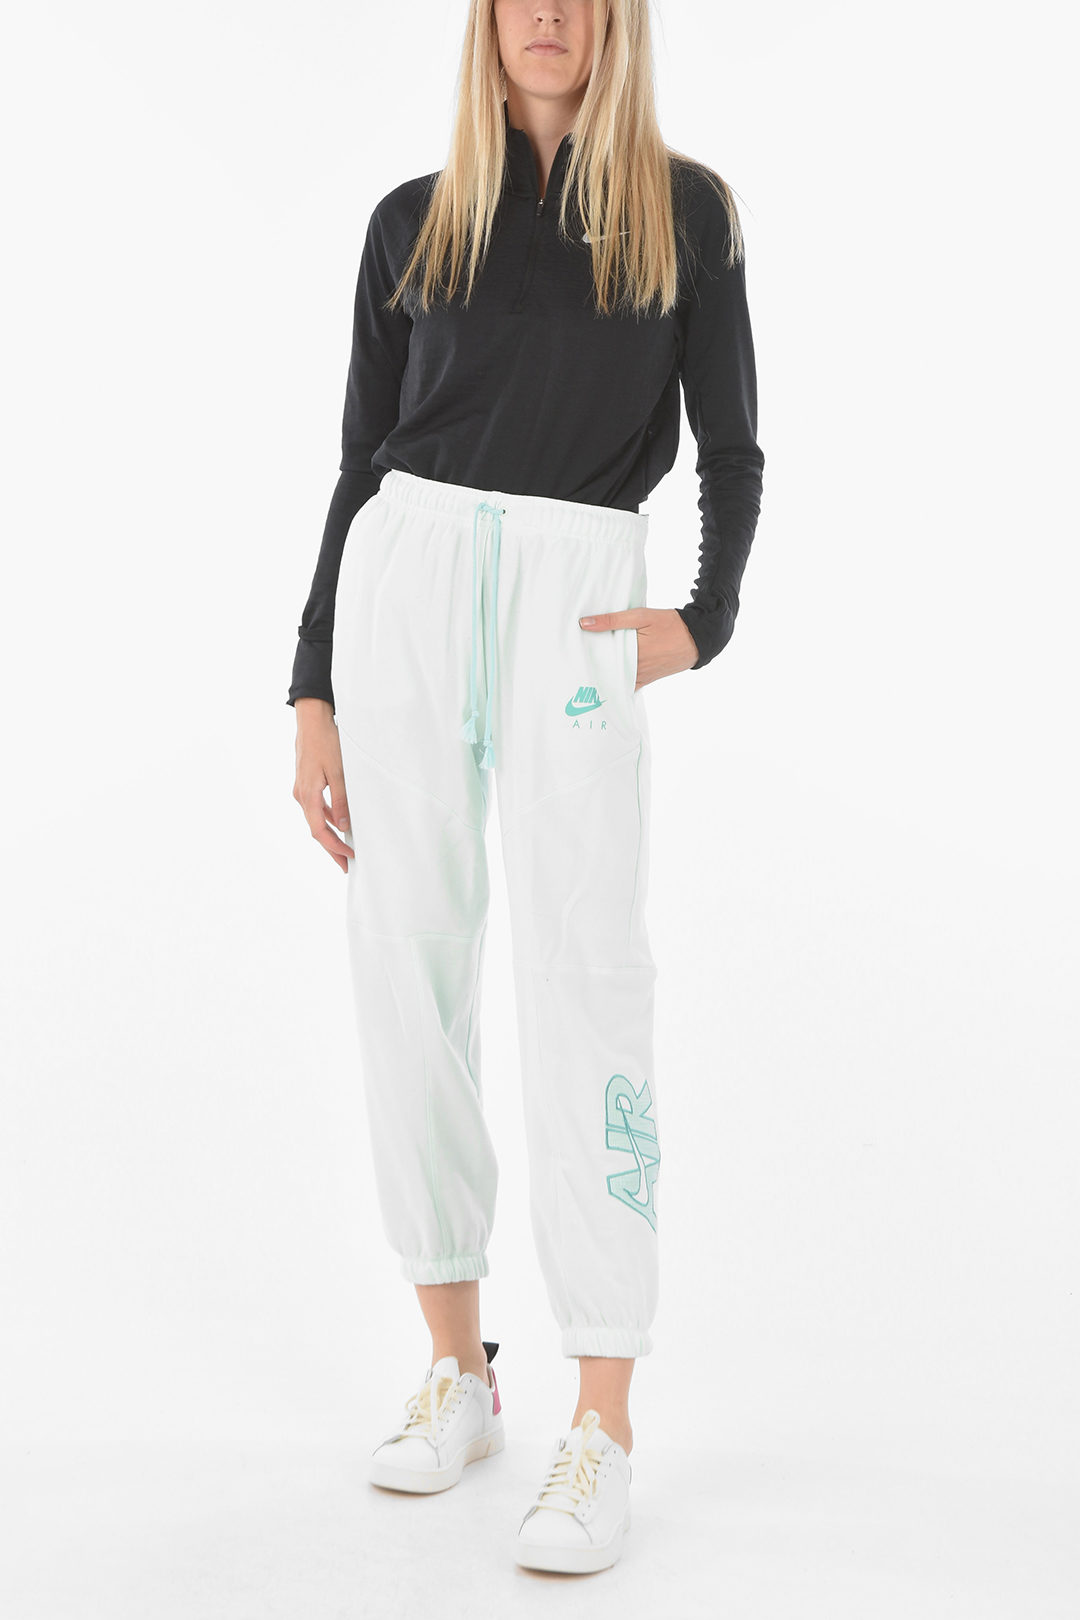 Nike AIR Logo Embroidered Loose Fit Jogger women - Glamood Outlet